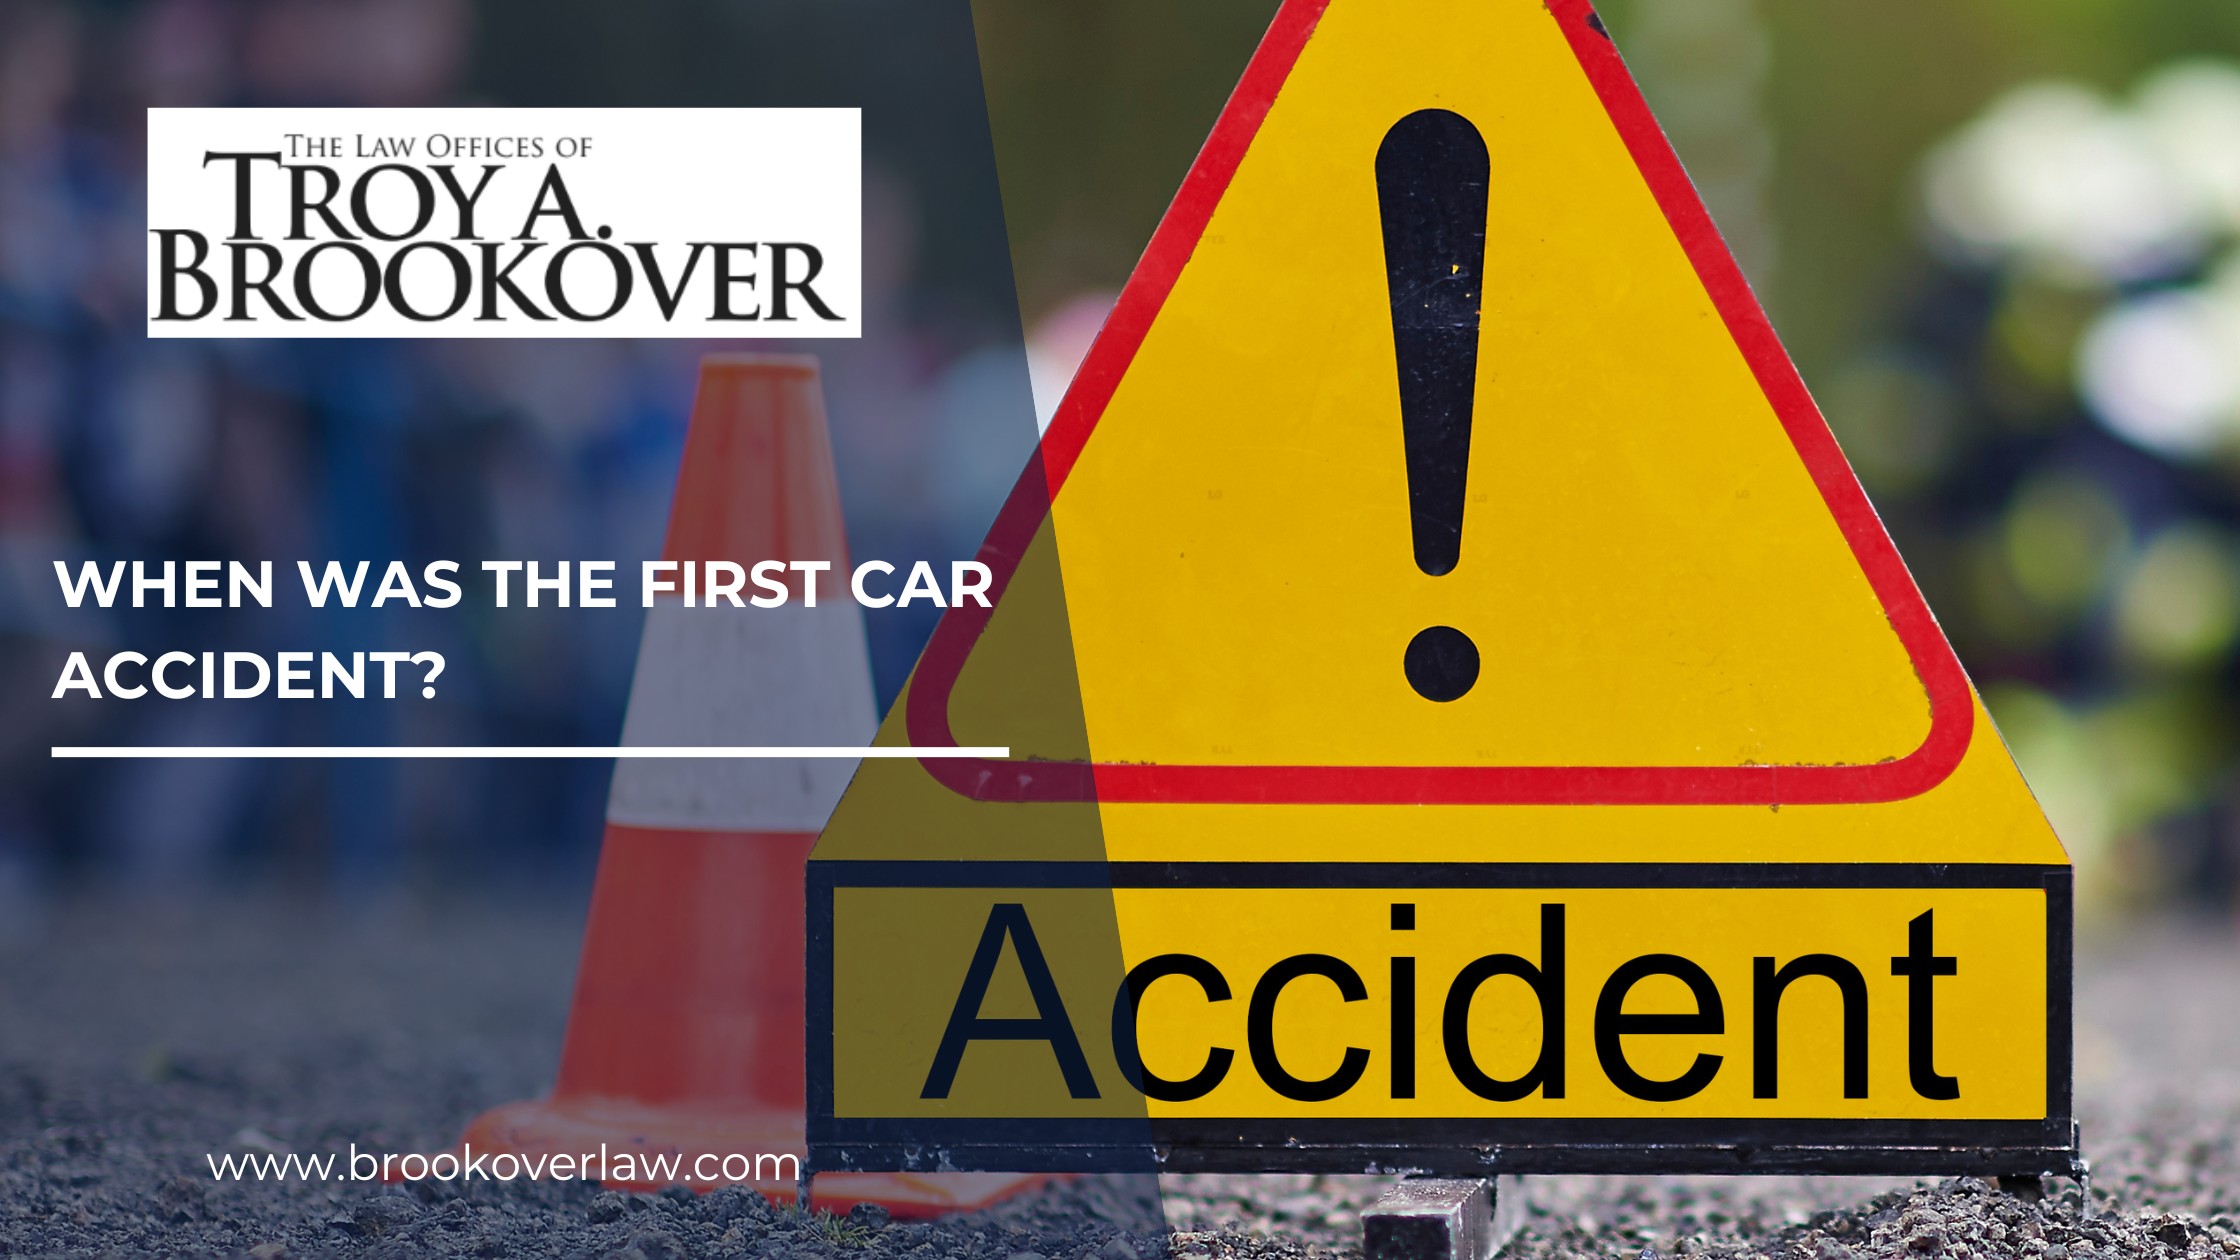 The image features a yellow caution sign with an exclamation point and a traffic cone, emphasizing road safety. Overlay text asks, "When was the first car accident?" drawing attention to the history of automobile accidents. It also showcases the expertise of "The Law Offices of Troy A. Brookover," linking their specialized legal knowledge directly with the topic.